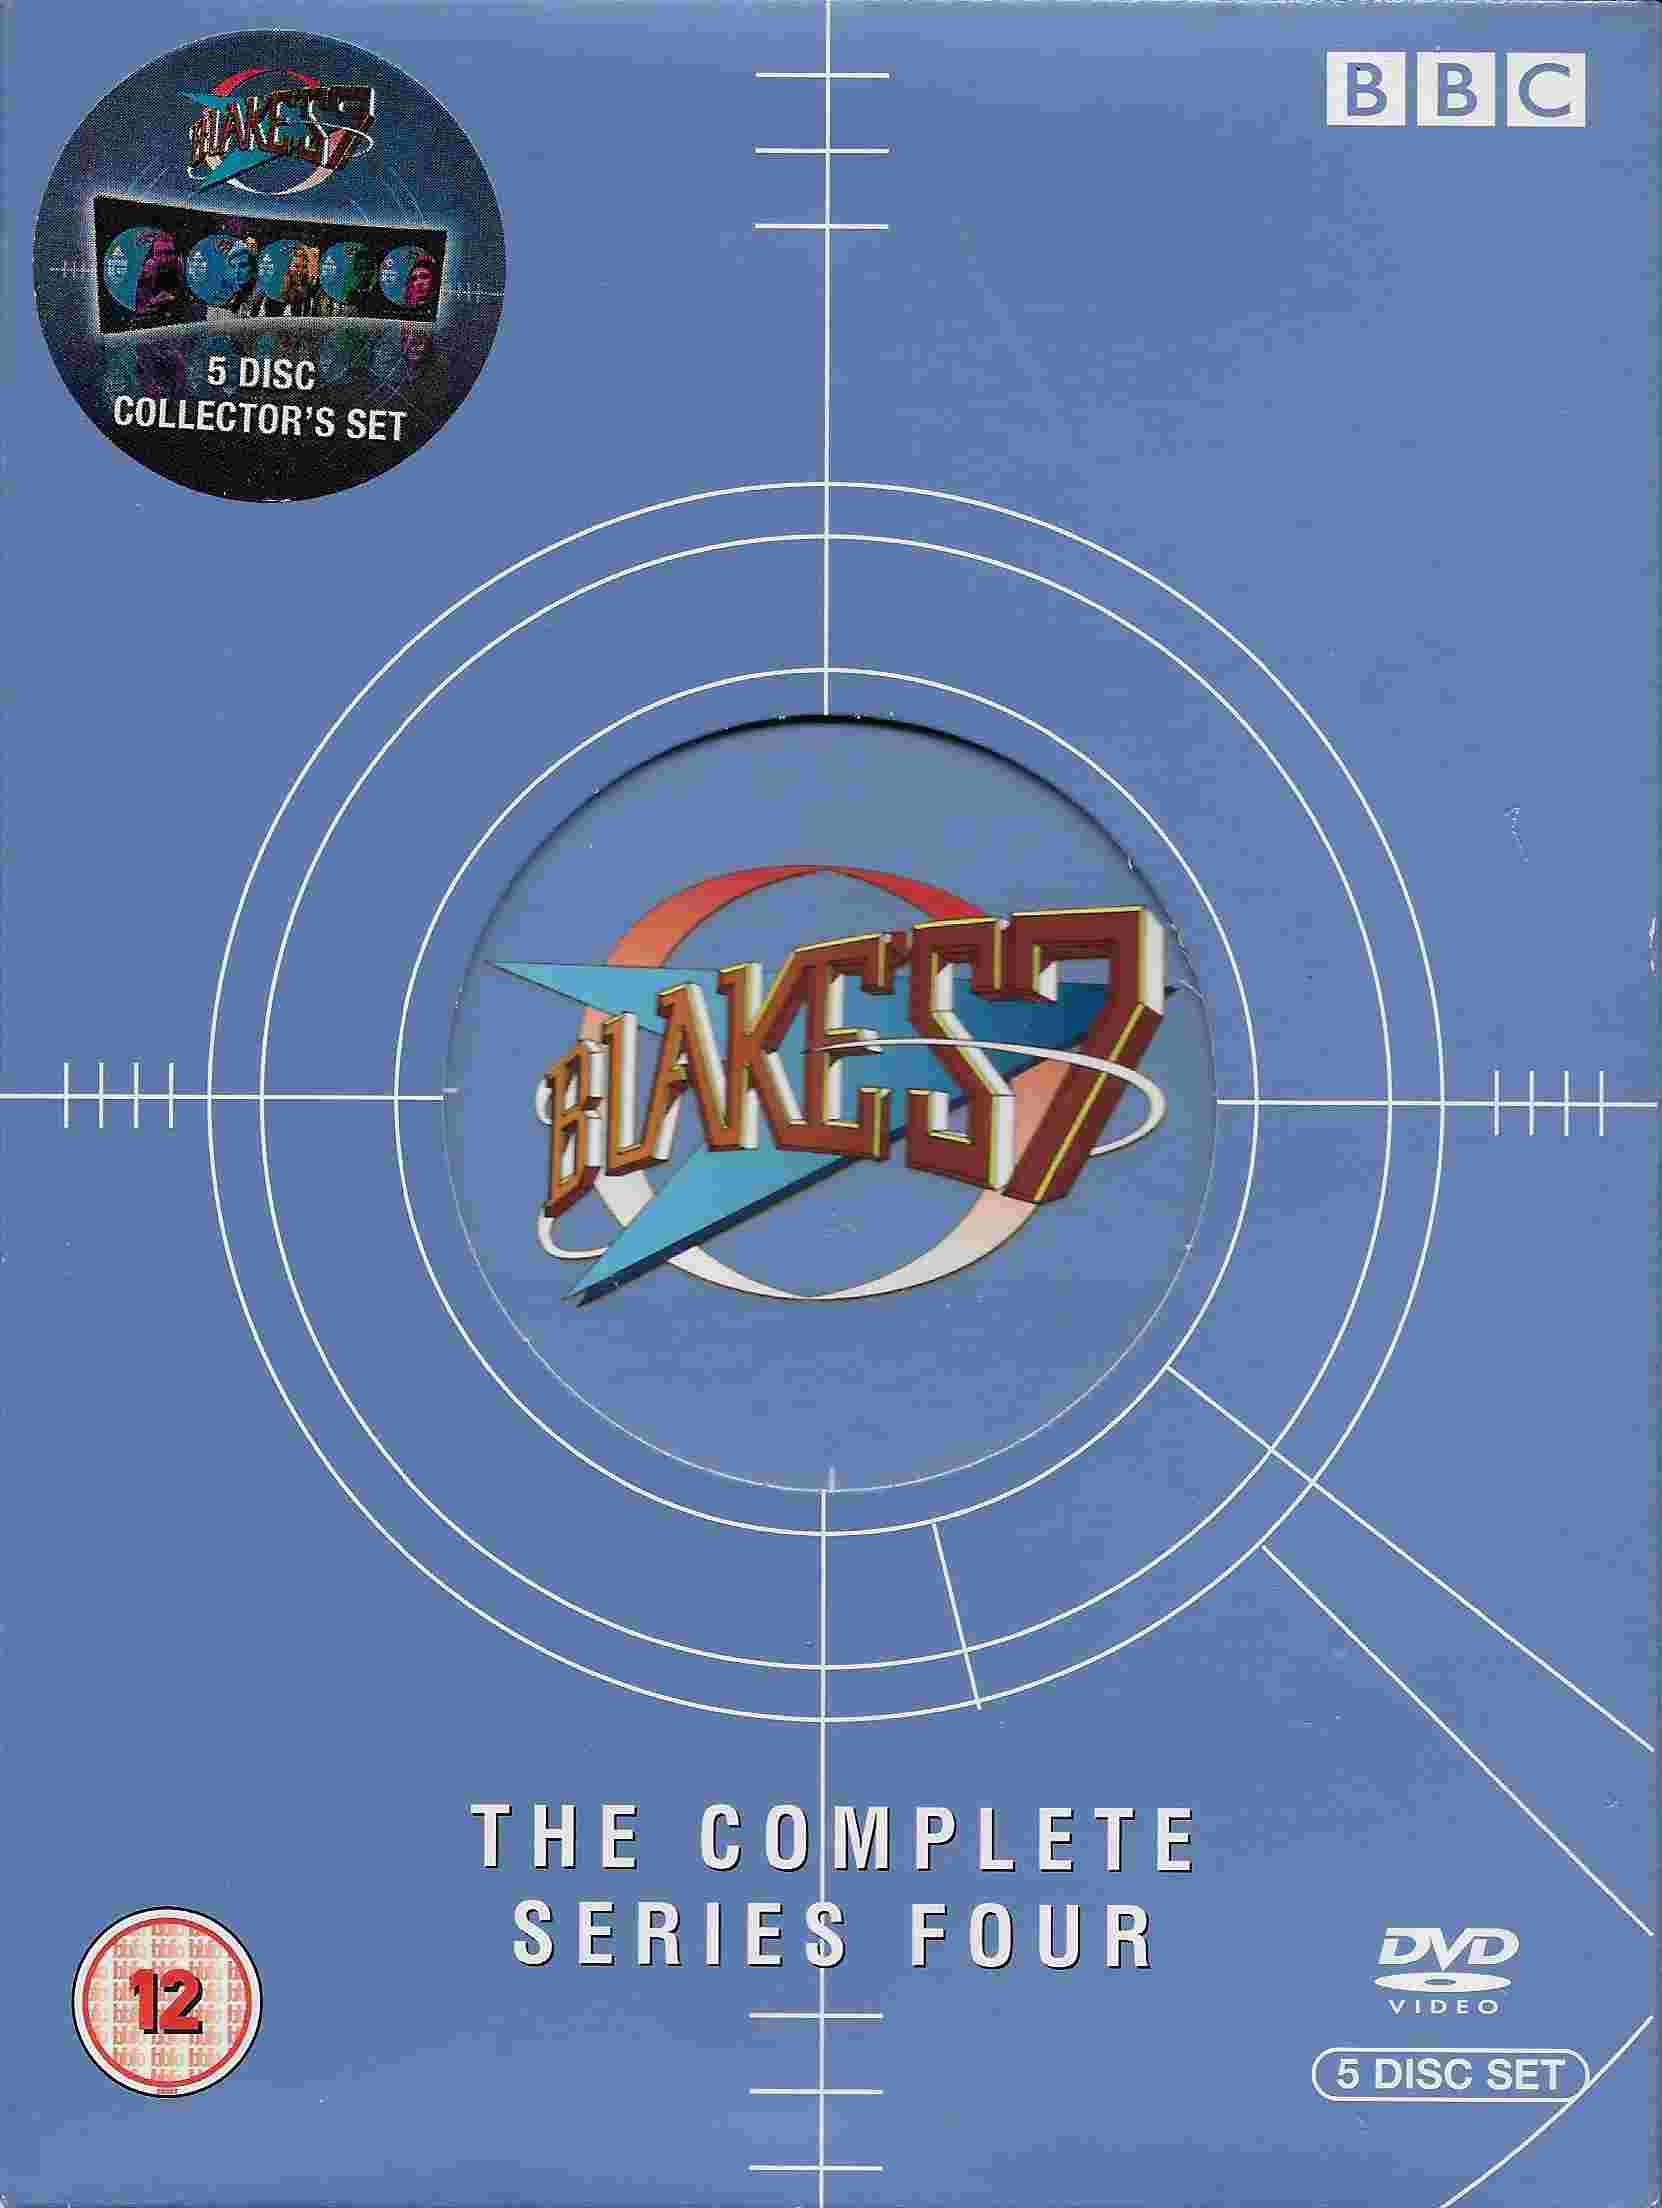 Picture of BBCDVD 1186 Blake's 7 - Series 4 by artist Chris Boucher / Ben Steed / Robert Holmes / James Follett / Allan Prior / Roger Parkes / Rod Beacham / Bill Lyons / Tanith Lee / Colin Davis / Simon Masters from the BBC dvds - Records and Tapes library